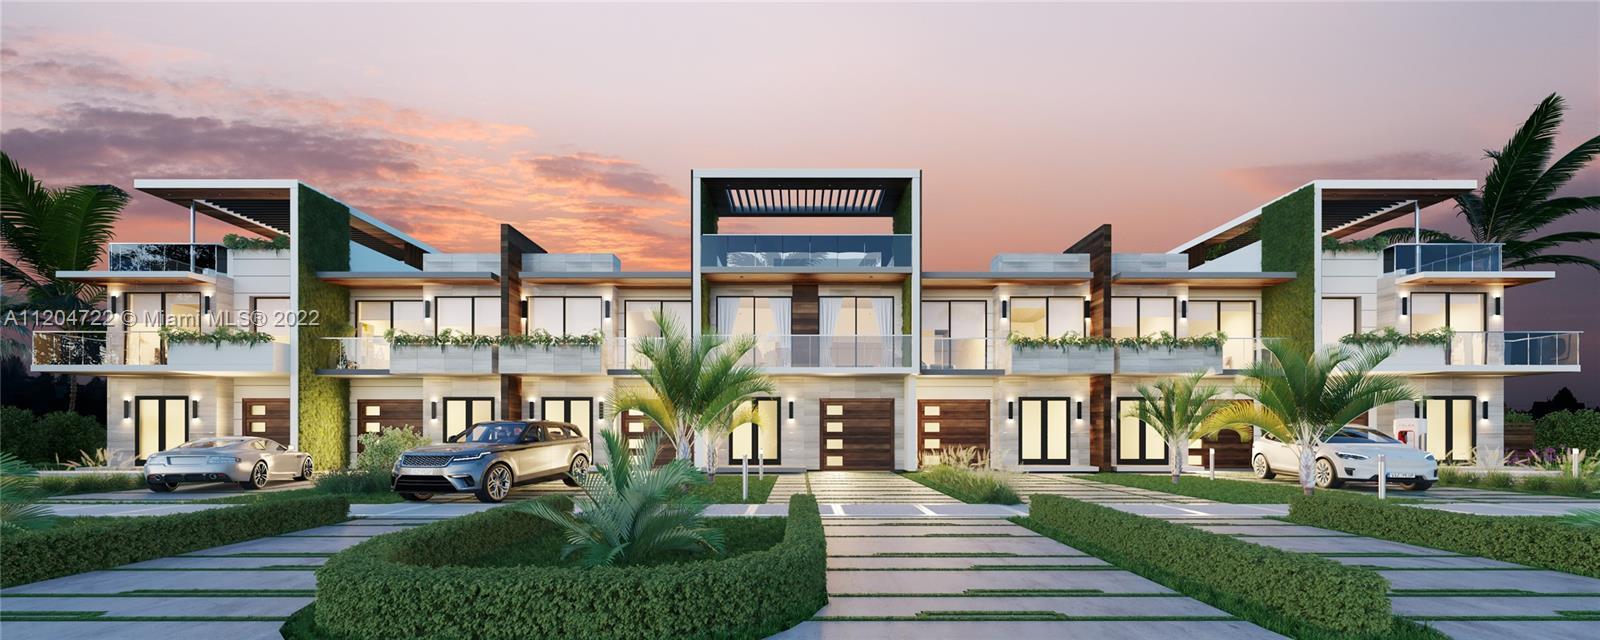 The Mansions at Coral Ridge is a 7 Luxury (2 and 3 story) residence (only 5 residences remaining) in